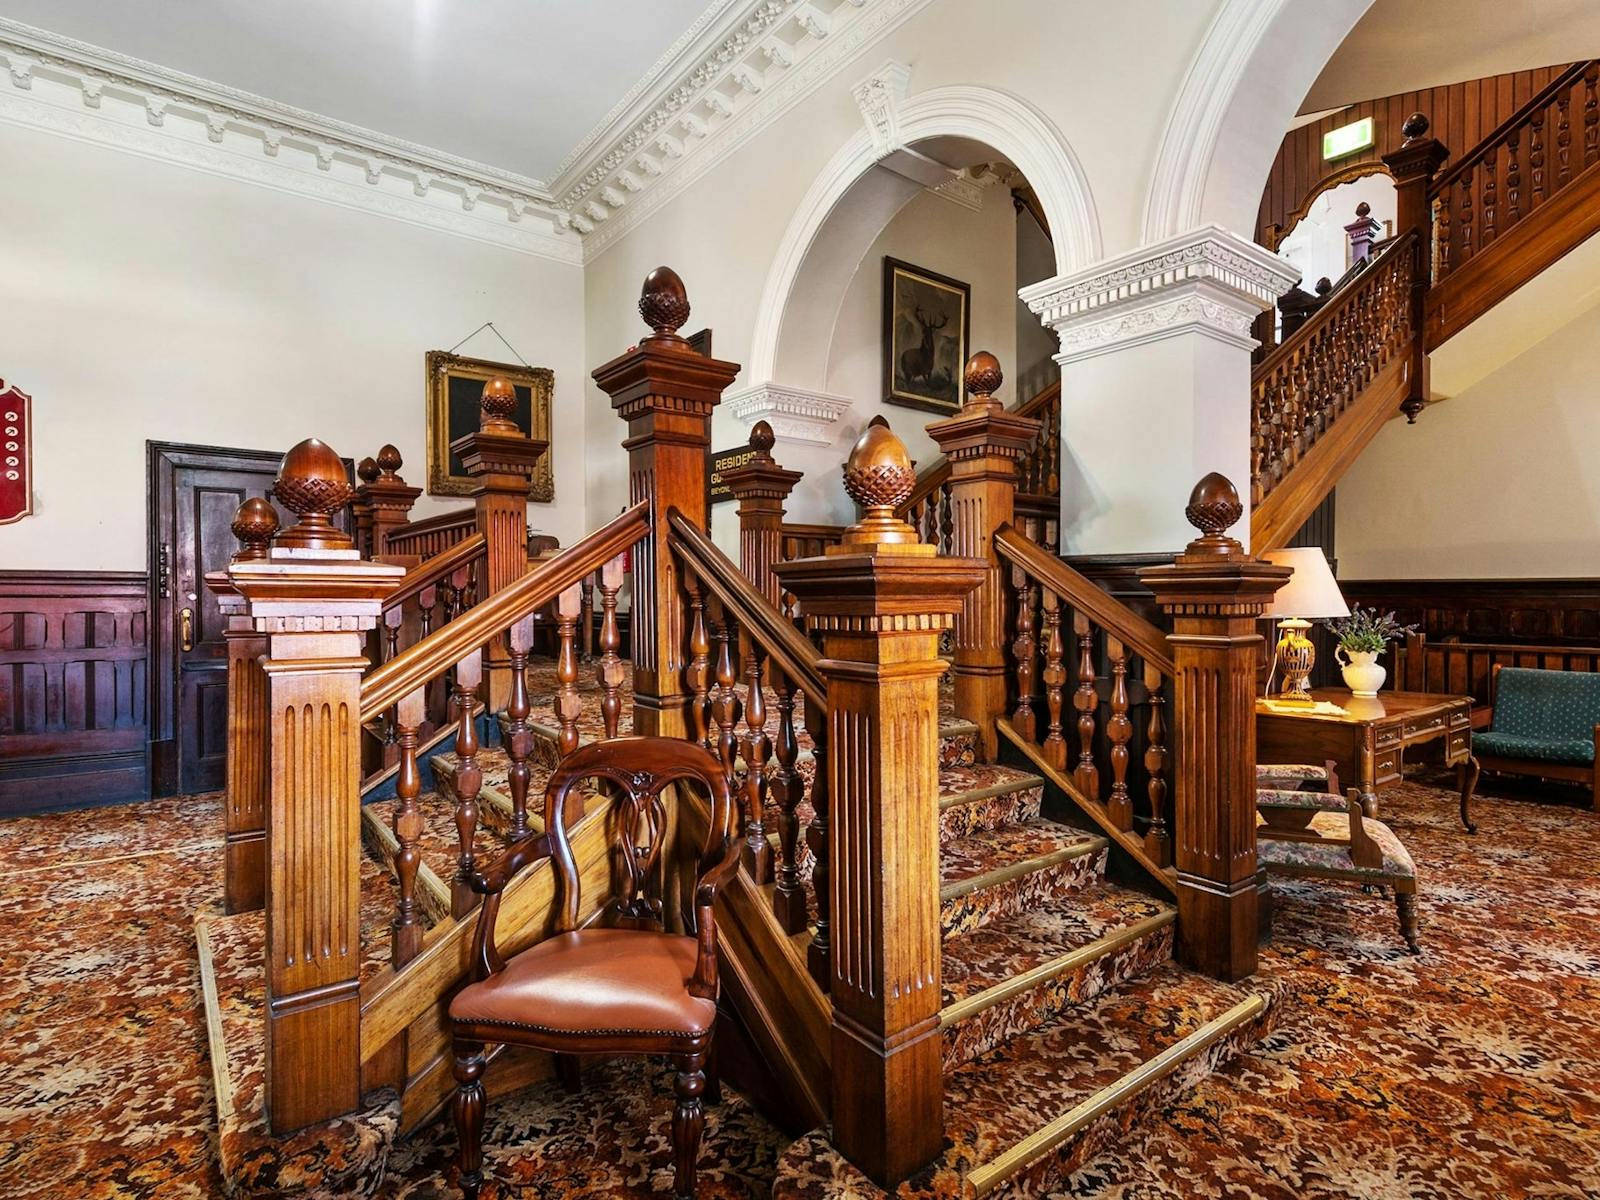 The Empire Hotel Heritage Staircase